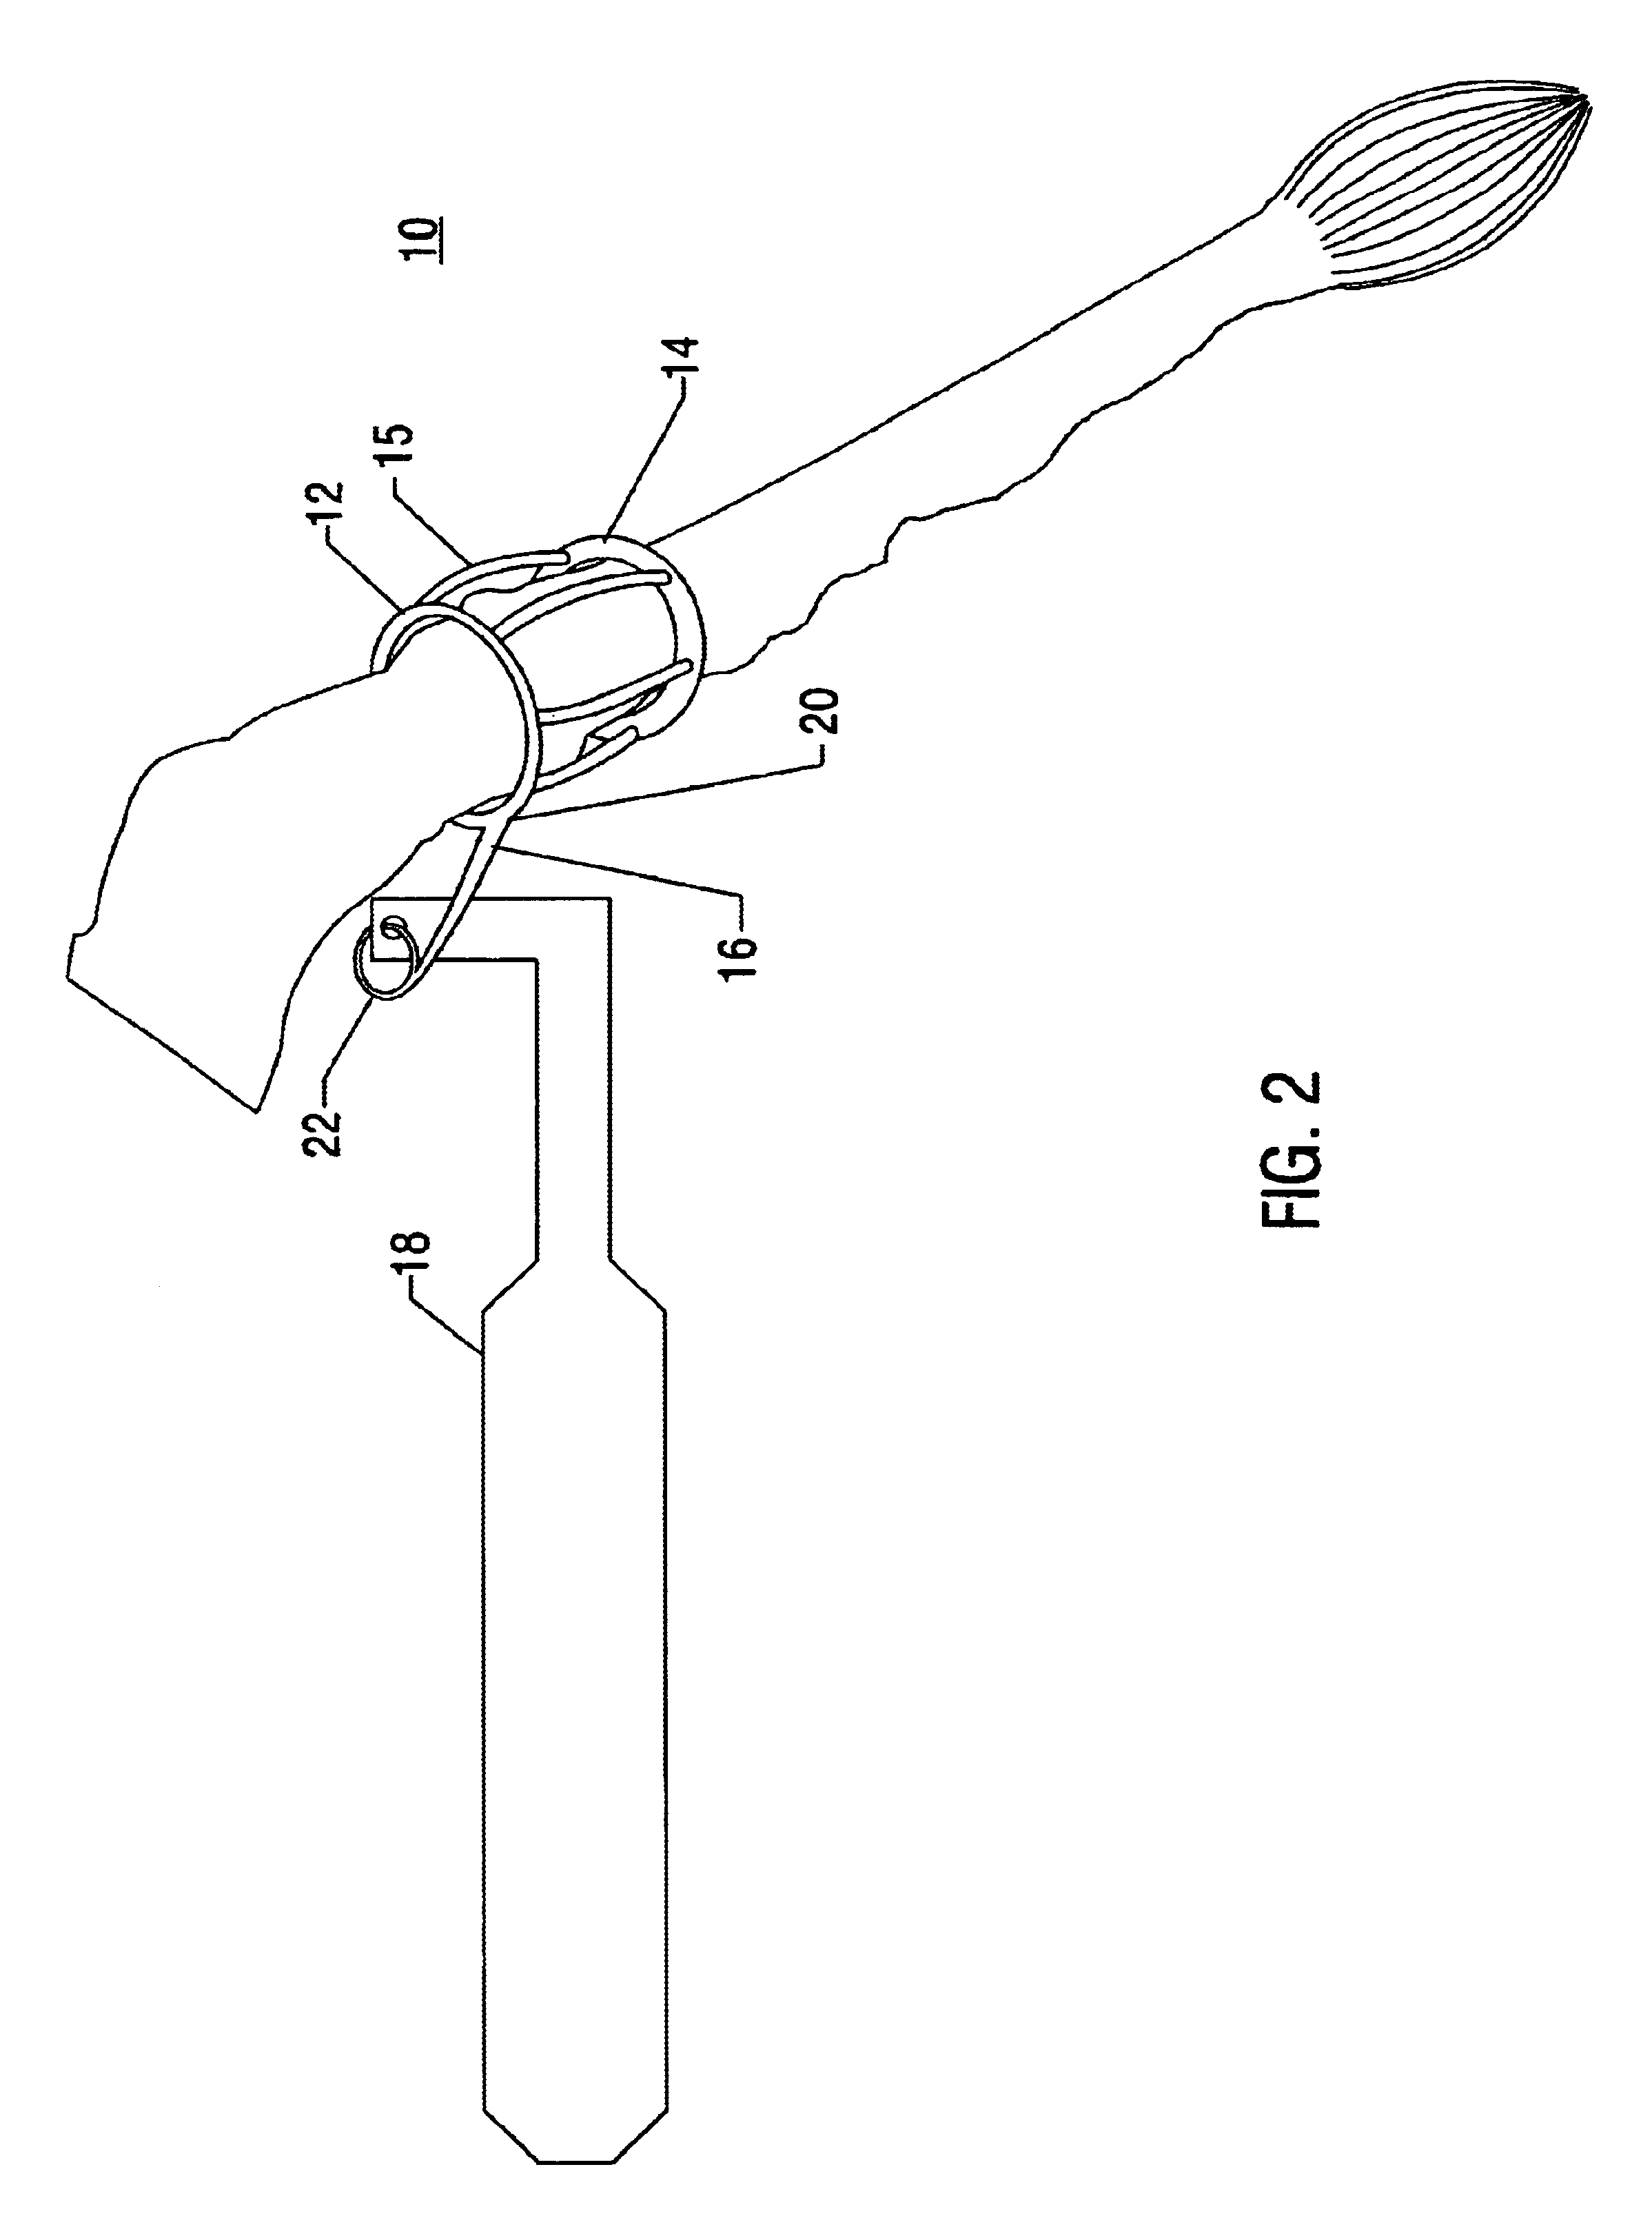 Intravaginal retention device for a tailed animal